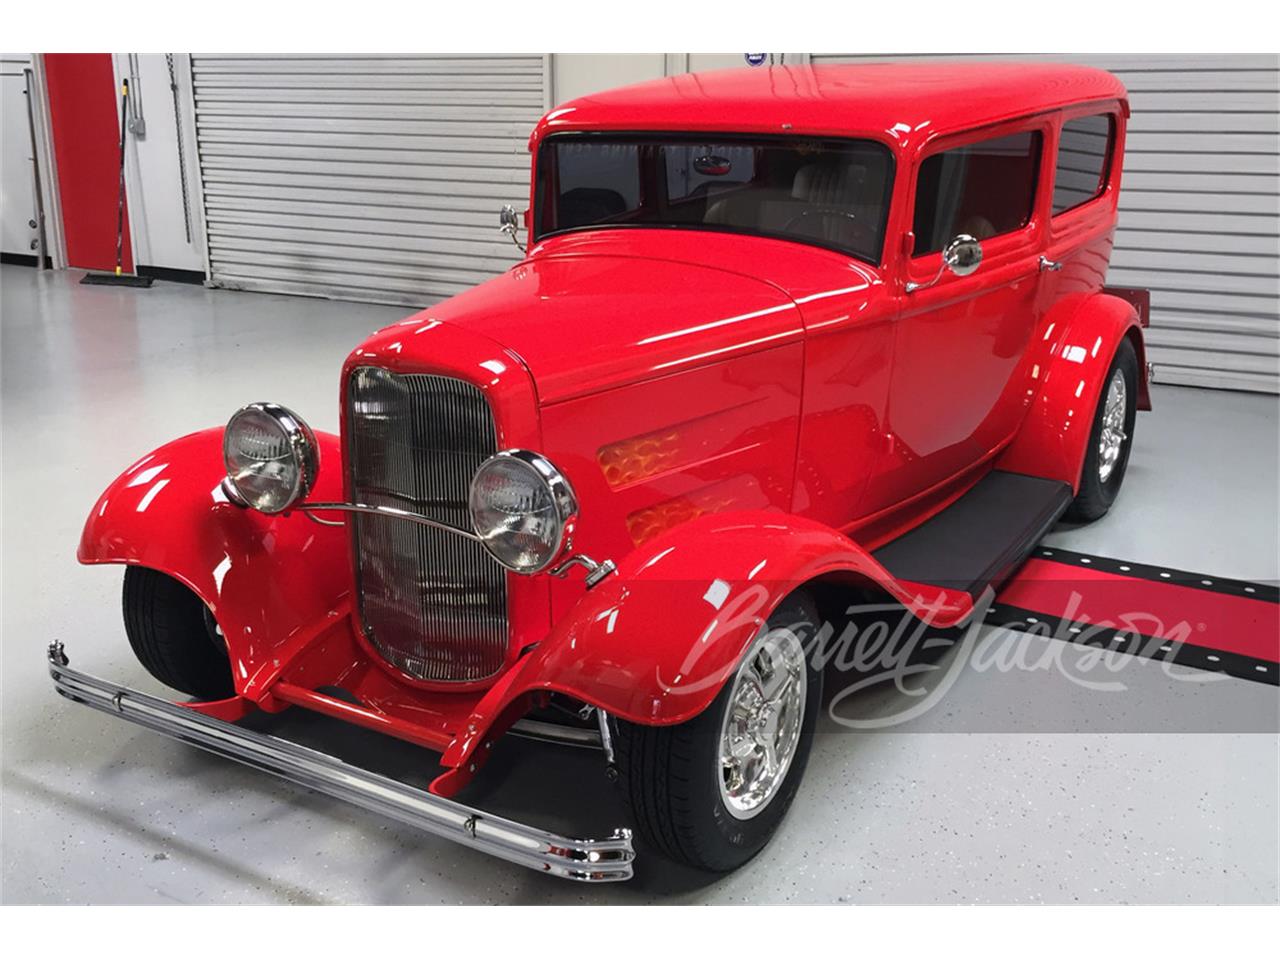 For Sale at Auction: 1932 Ford Tudor in Scottsdale, Arizona for sale in Scottsdale, AZ